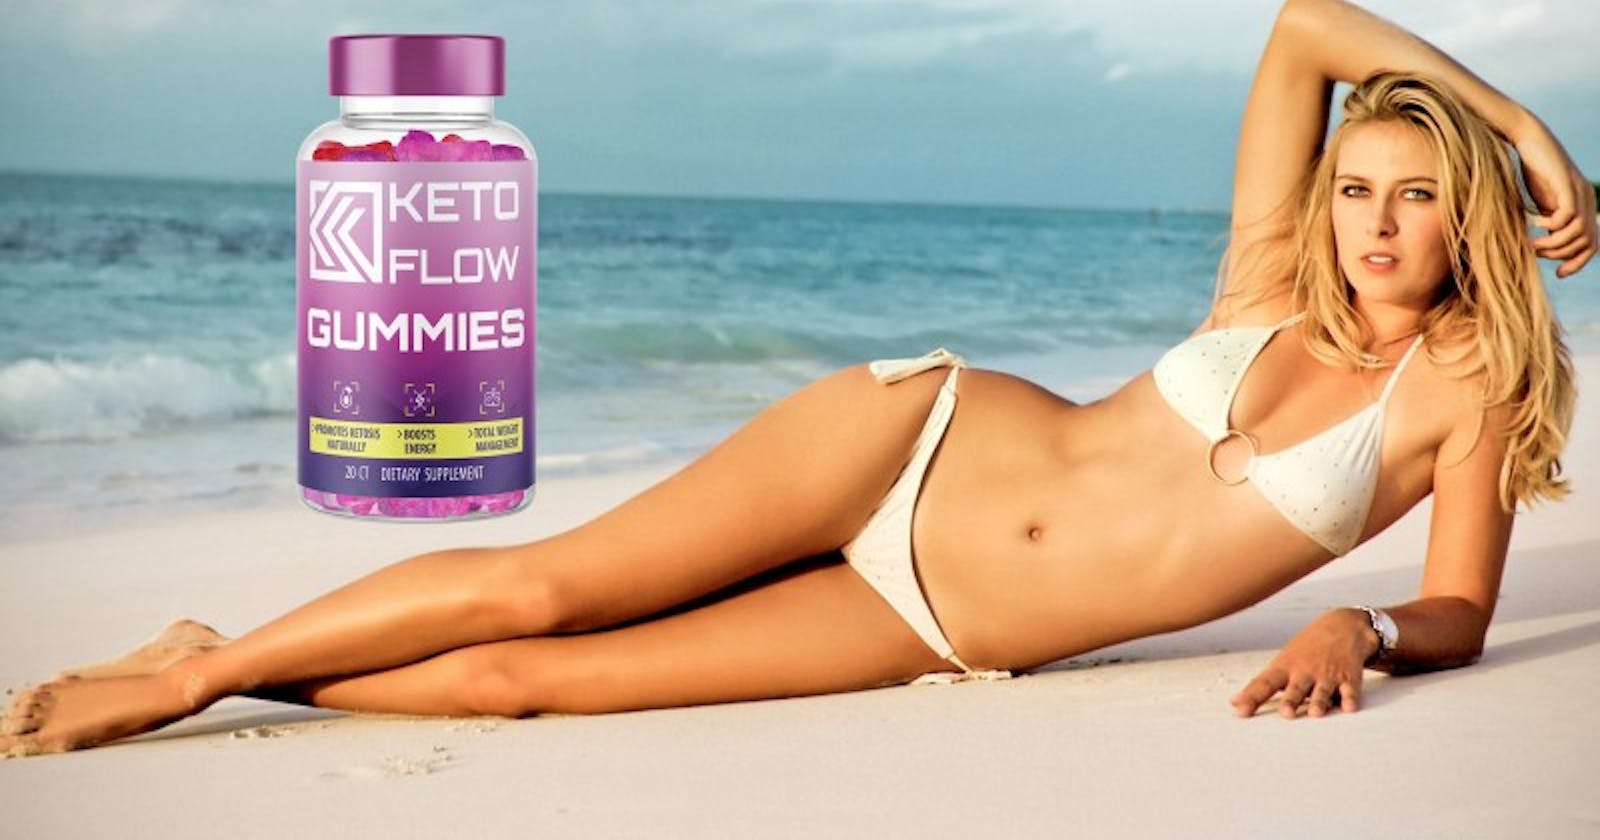 How Keto Flow Gummies Can Help You Achieve Your Weight Loss Goals?